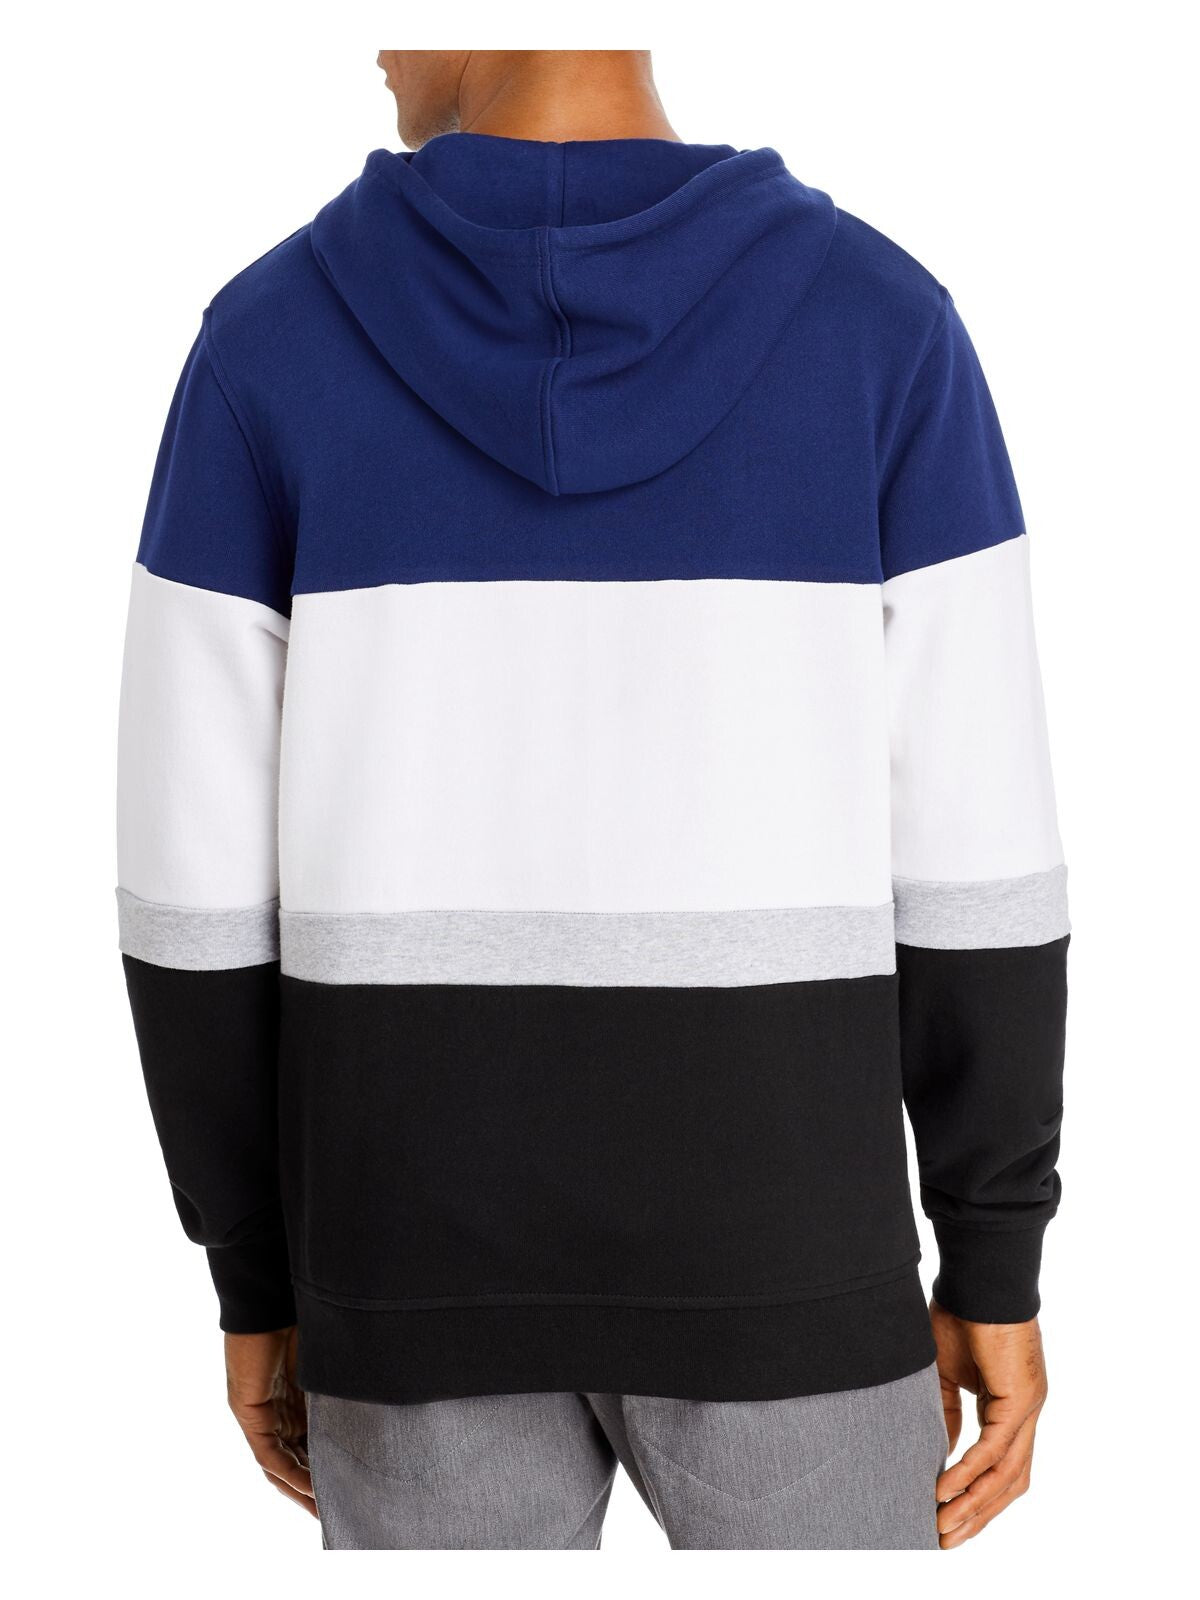 Pacific and Park Mens Navy Color Block Classic Fit Draw String Hoodie S